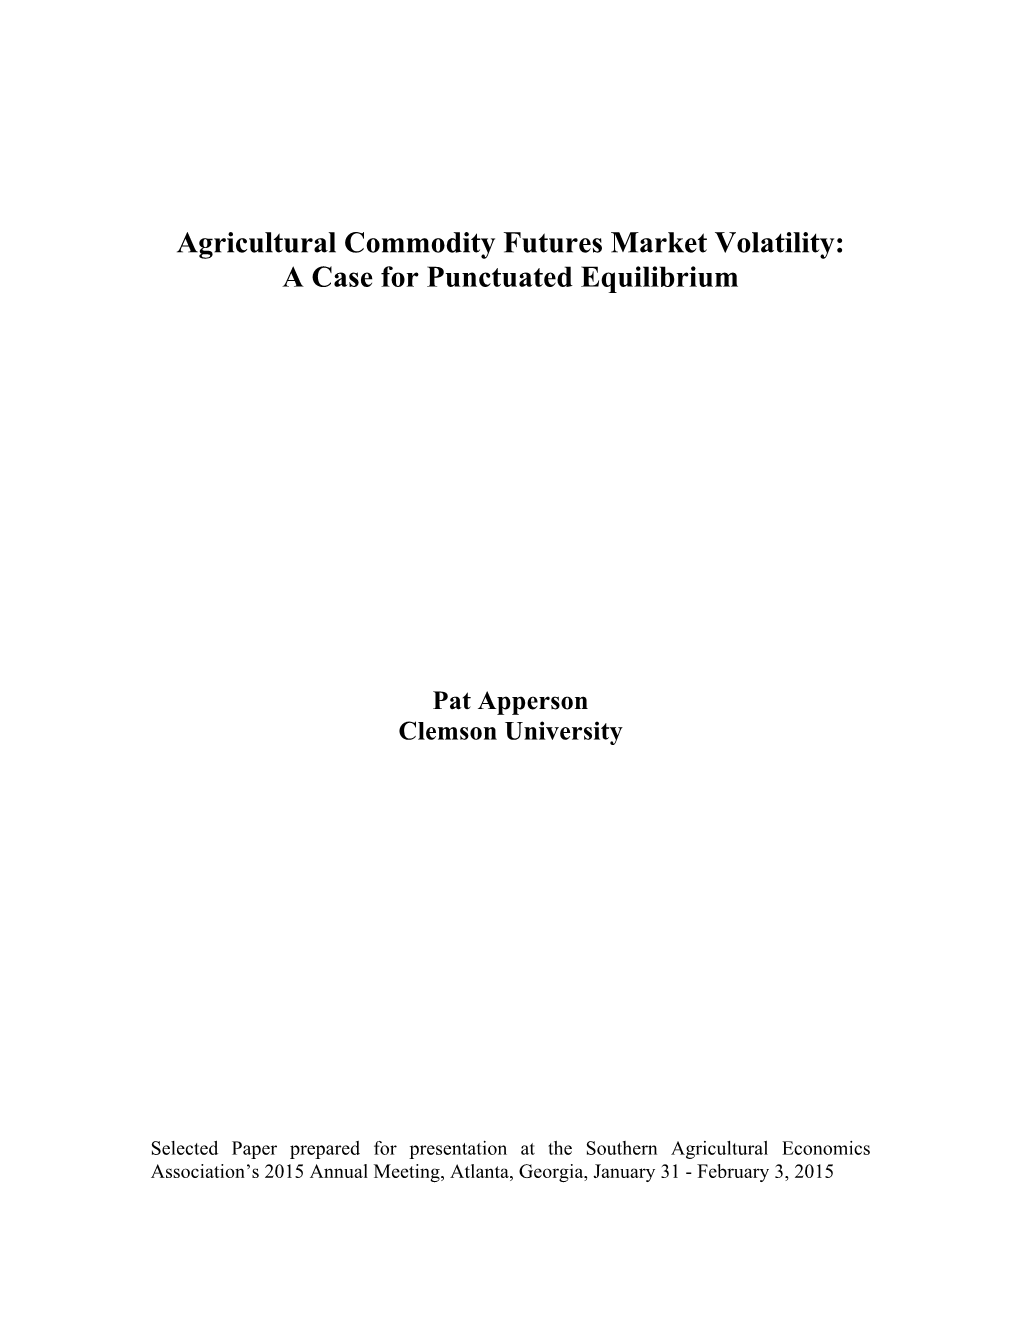 Agricultural Commodity Futures Market Volatility: a Case for Punctuated Equilibrium